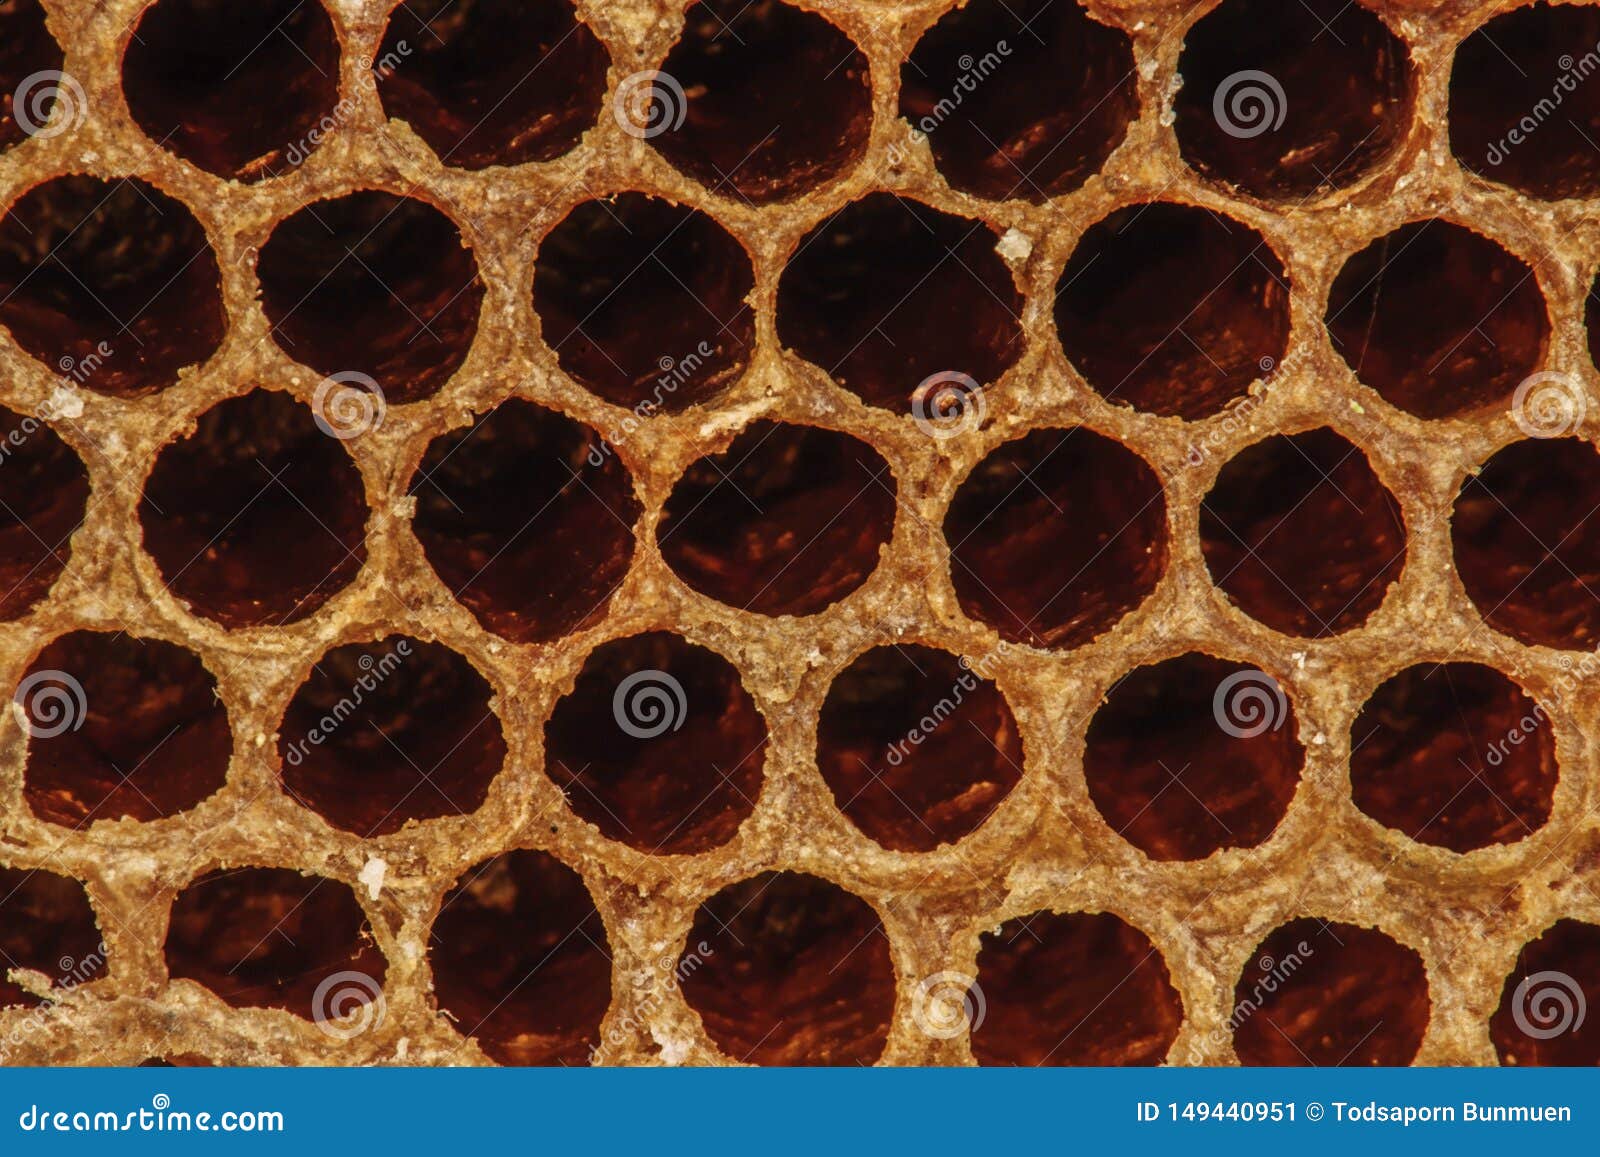 Background Texture And Pattern Of A Section Of Wax ...